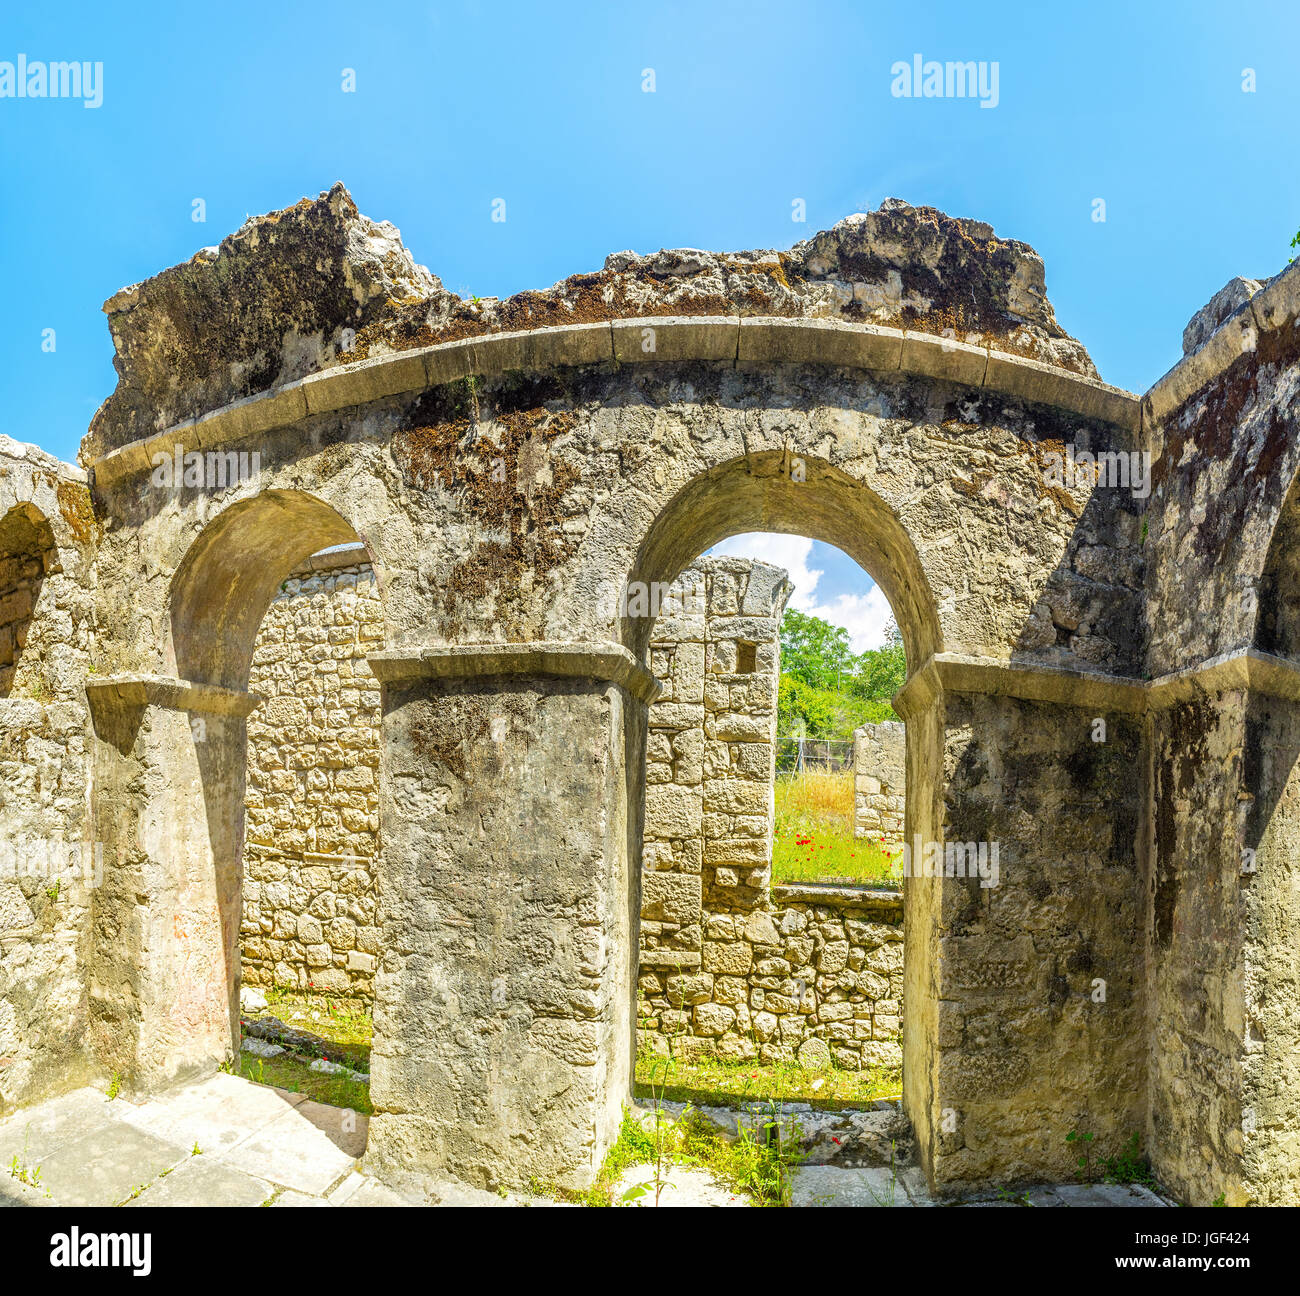 The ruined wall with two arches separates visitors area and archaeological zone of St Nicholas Church complex, Demre, Turkey. Stock Photo